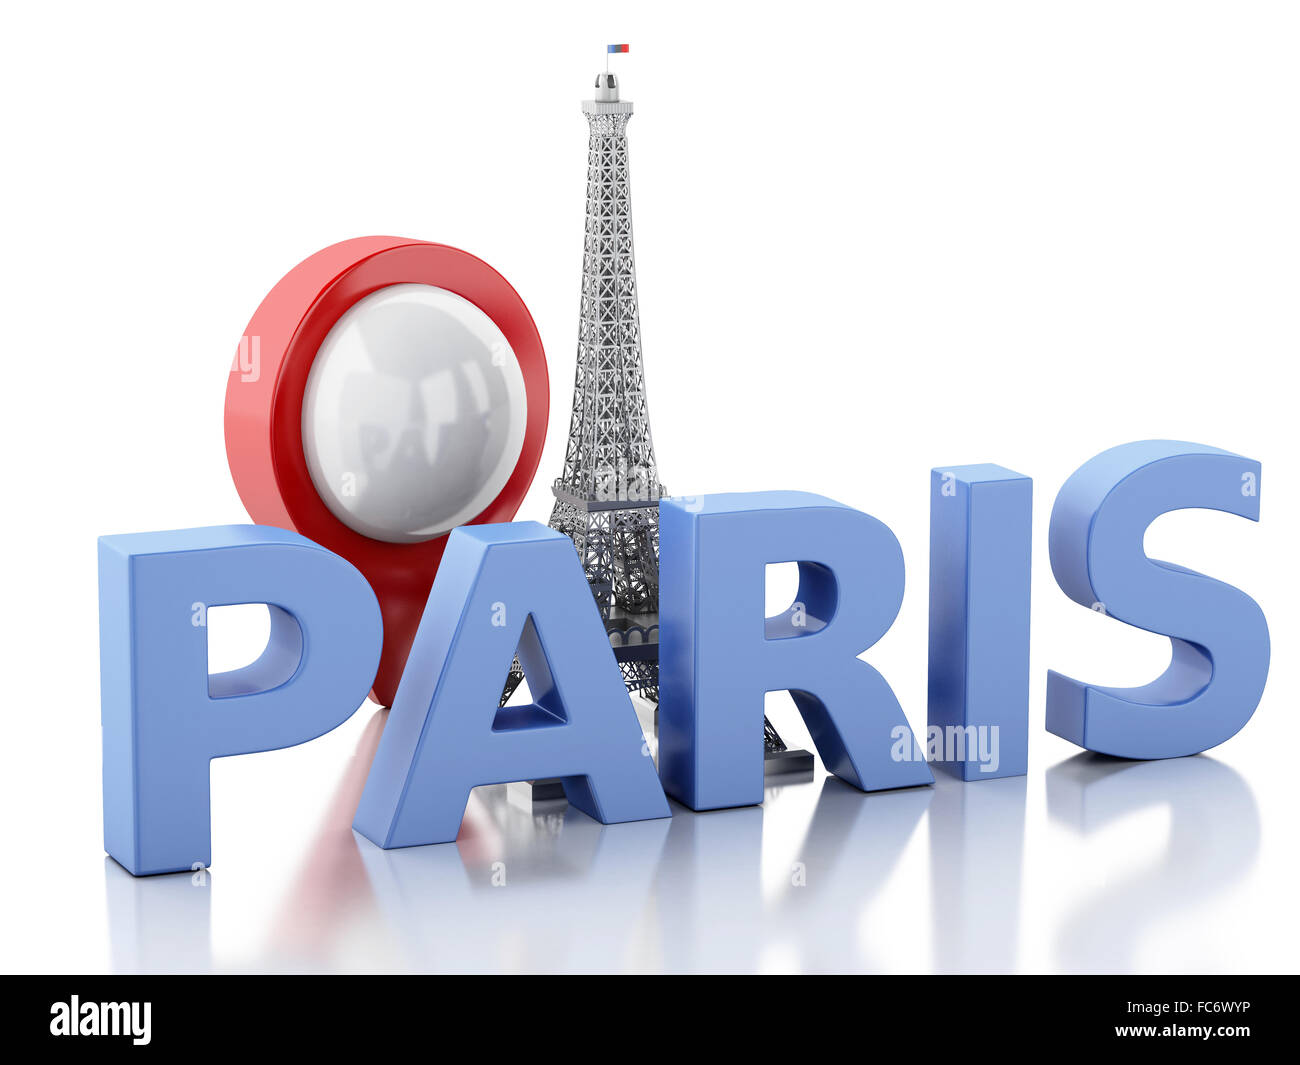 3d Paris word with eiffel tower. Stock Photo